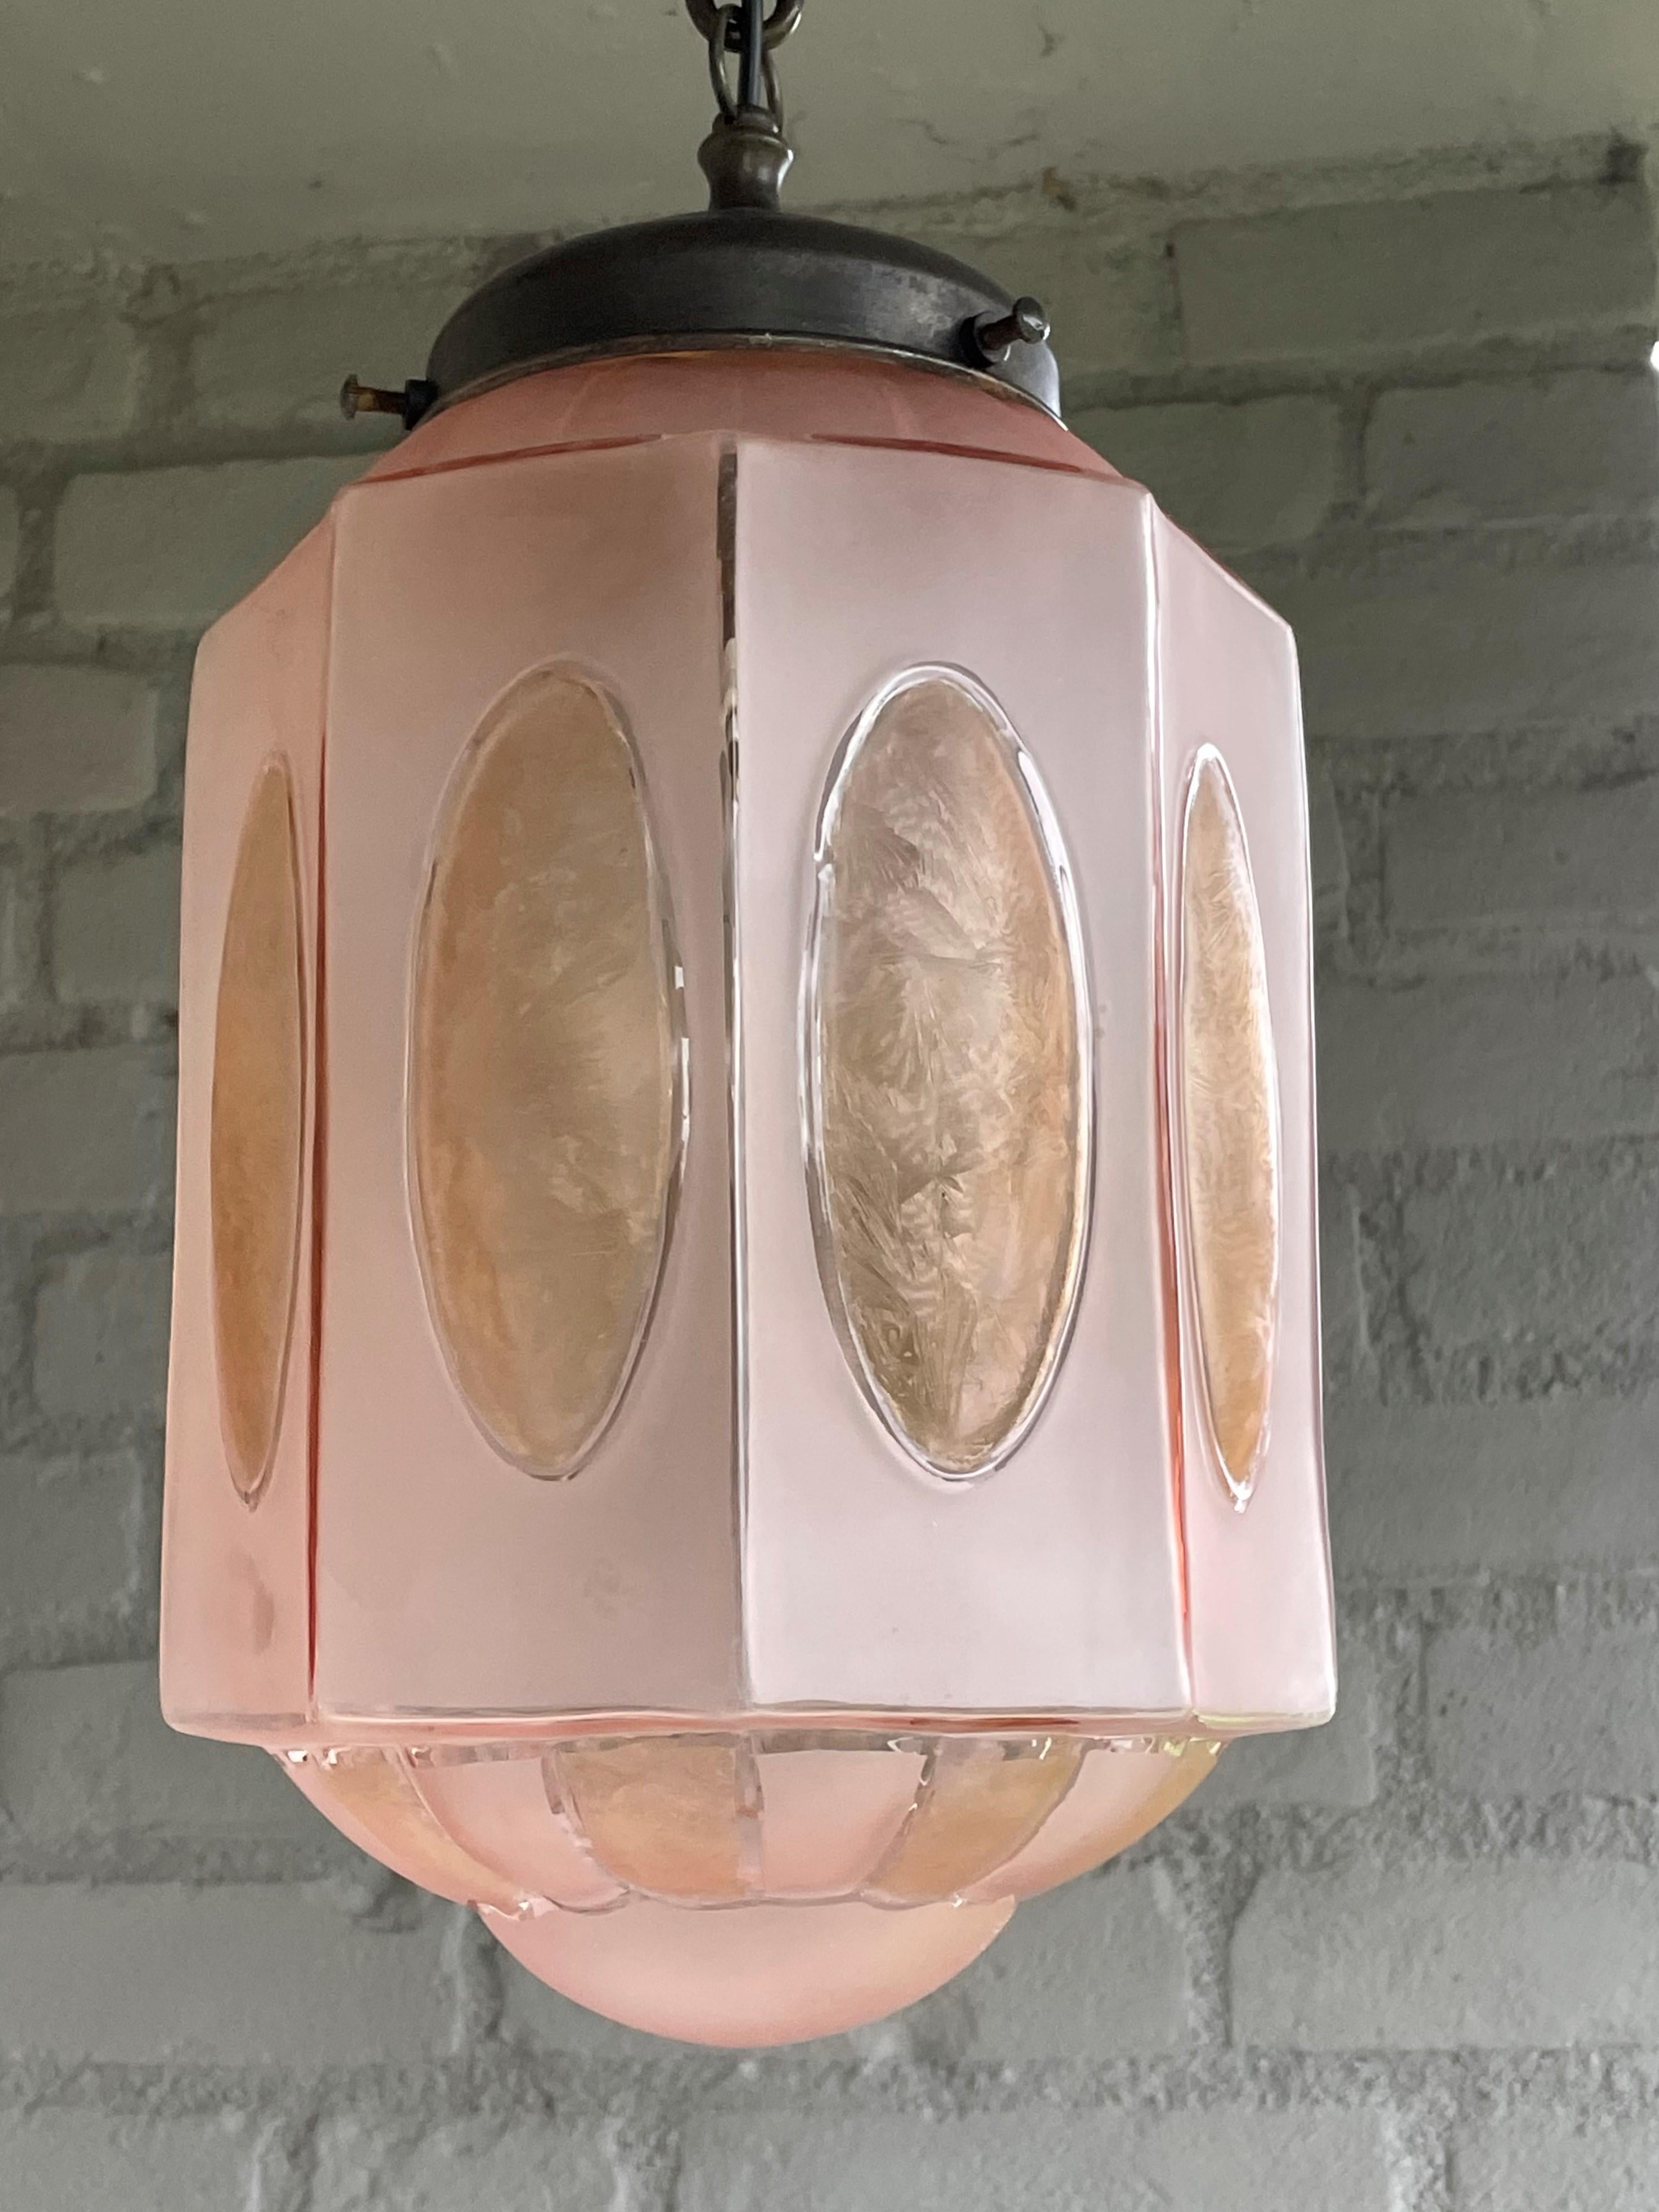 Rare Art Deco Pendant Light Fixture w. Octagonal Satinated & Frosted Glass Shade For Sale 3